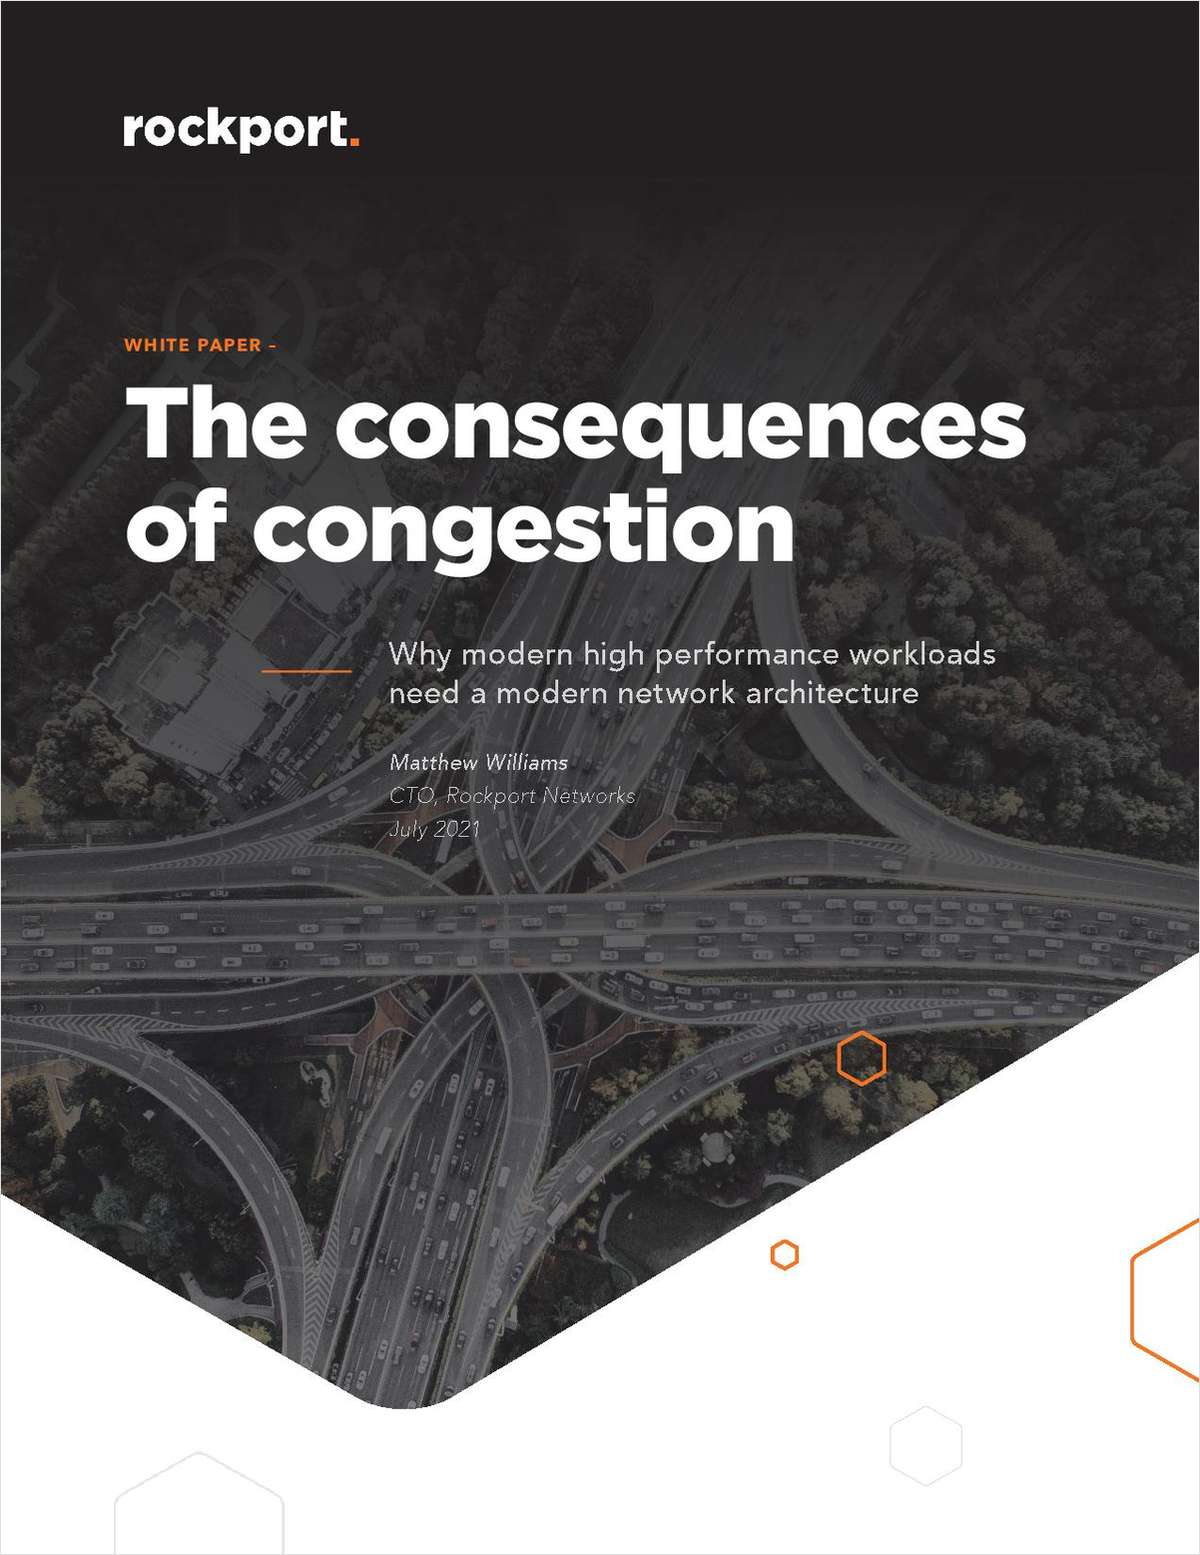 It's time to resolve the root cause of congestion